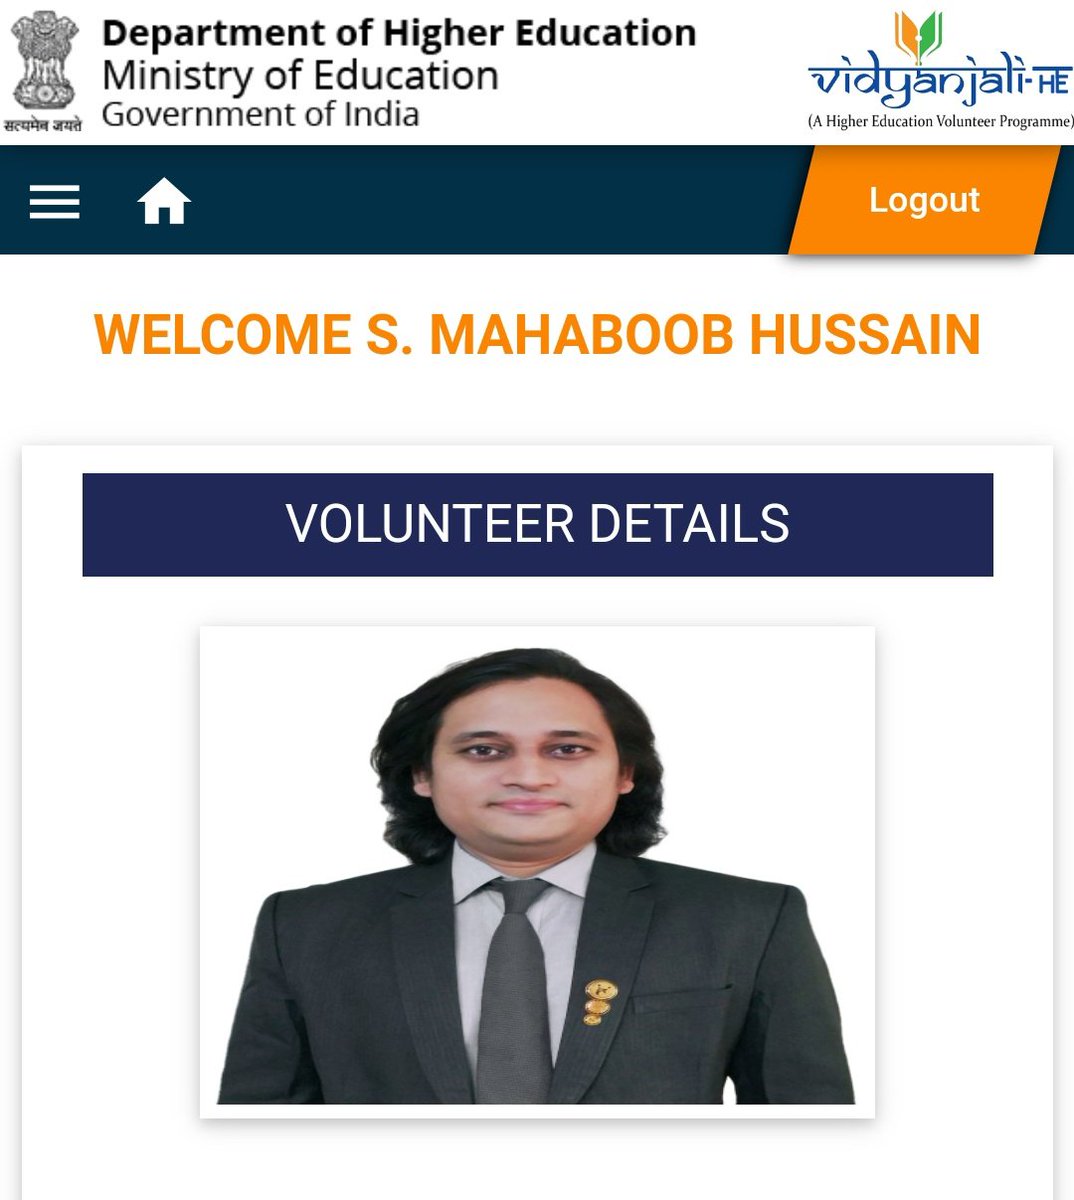 Now, I am the part of VIDYANJALI, an intiative of Department of Higher Education Education, @EduMinOfIndia , Govt. Of India. 
Join with us: vidyanjali-he.education.gov.in

#JoinVidyanjali #volunteer #education